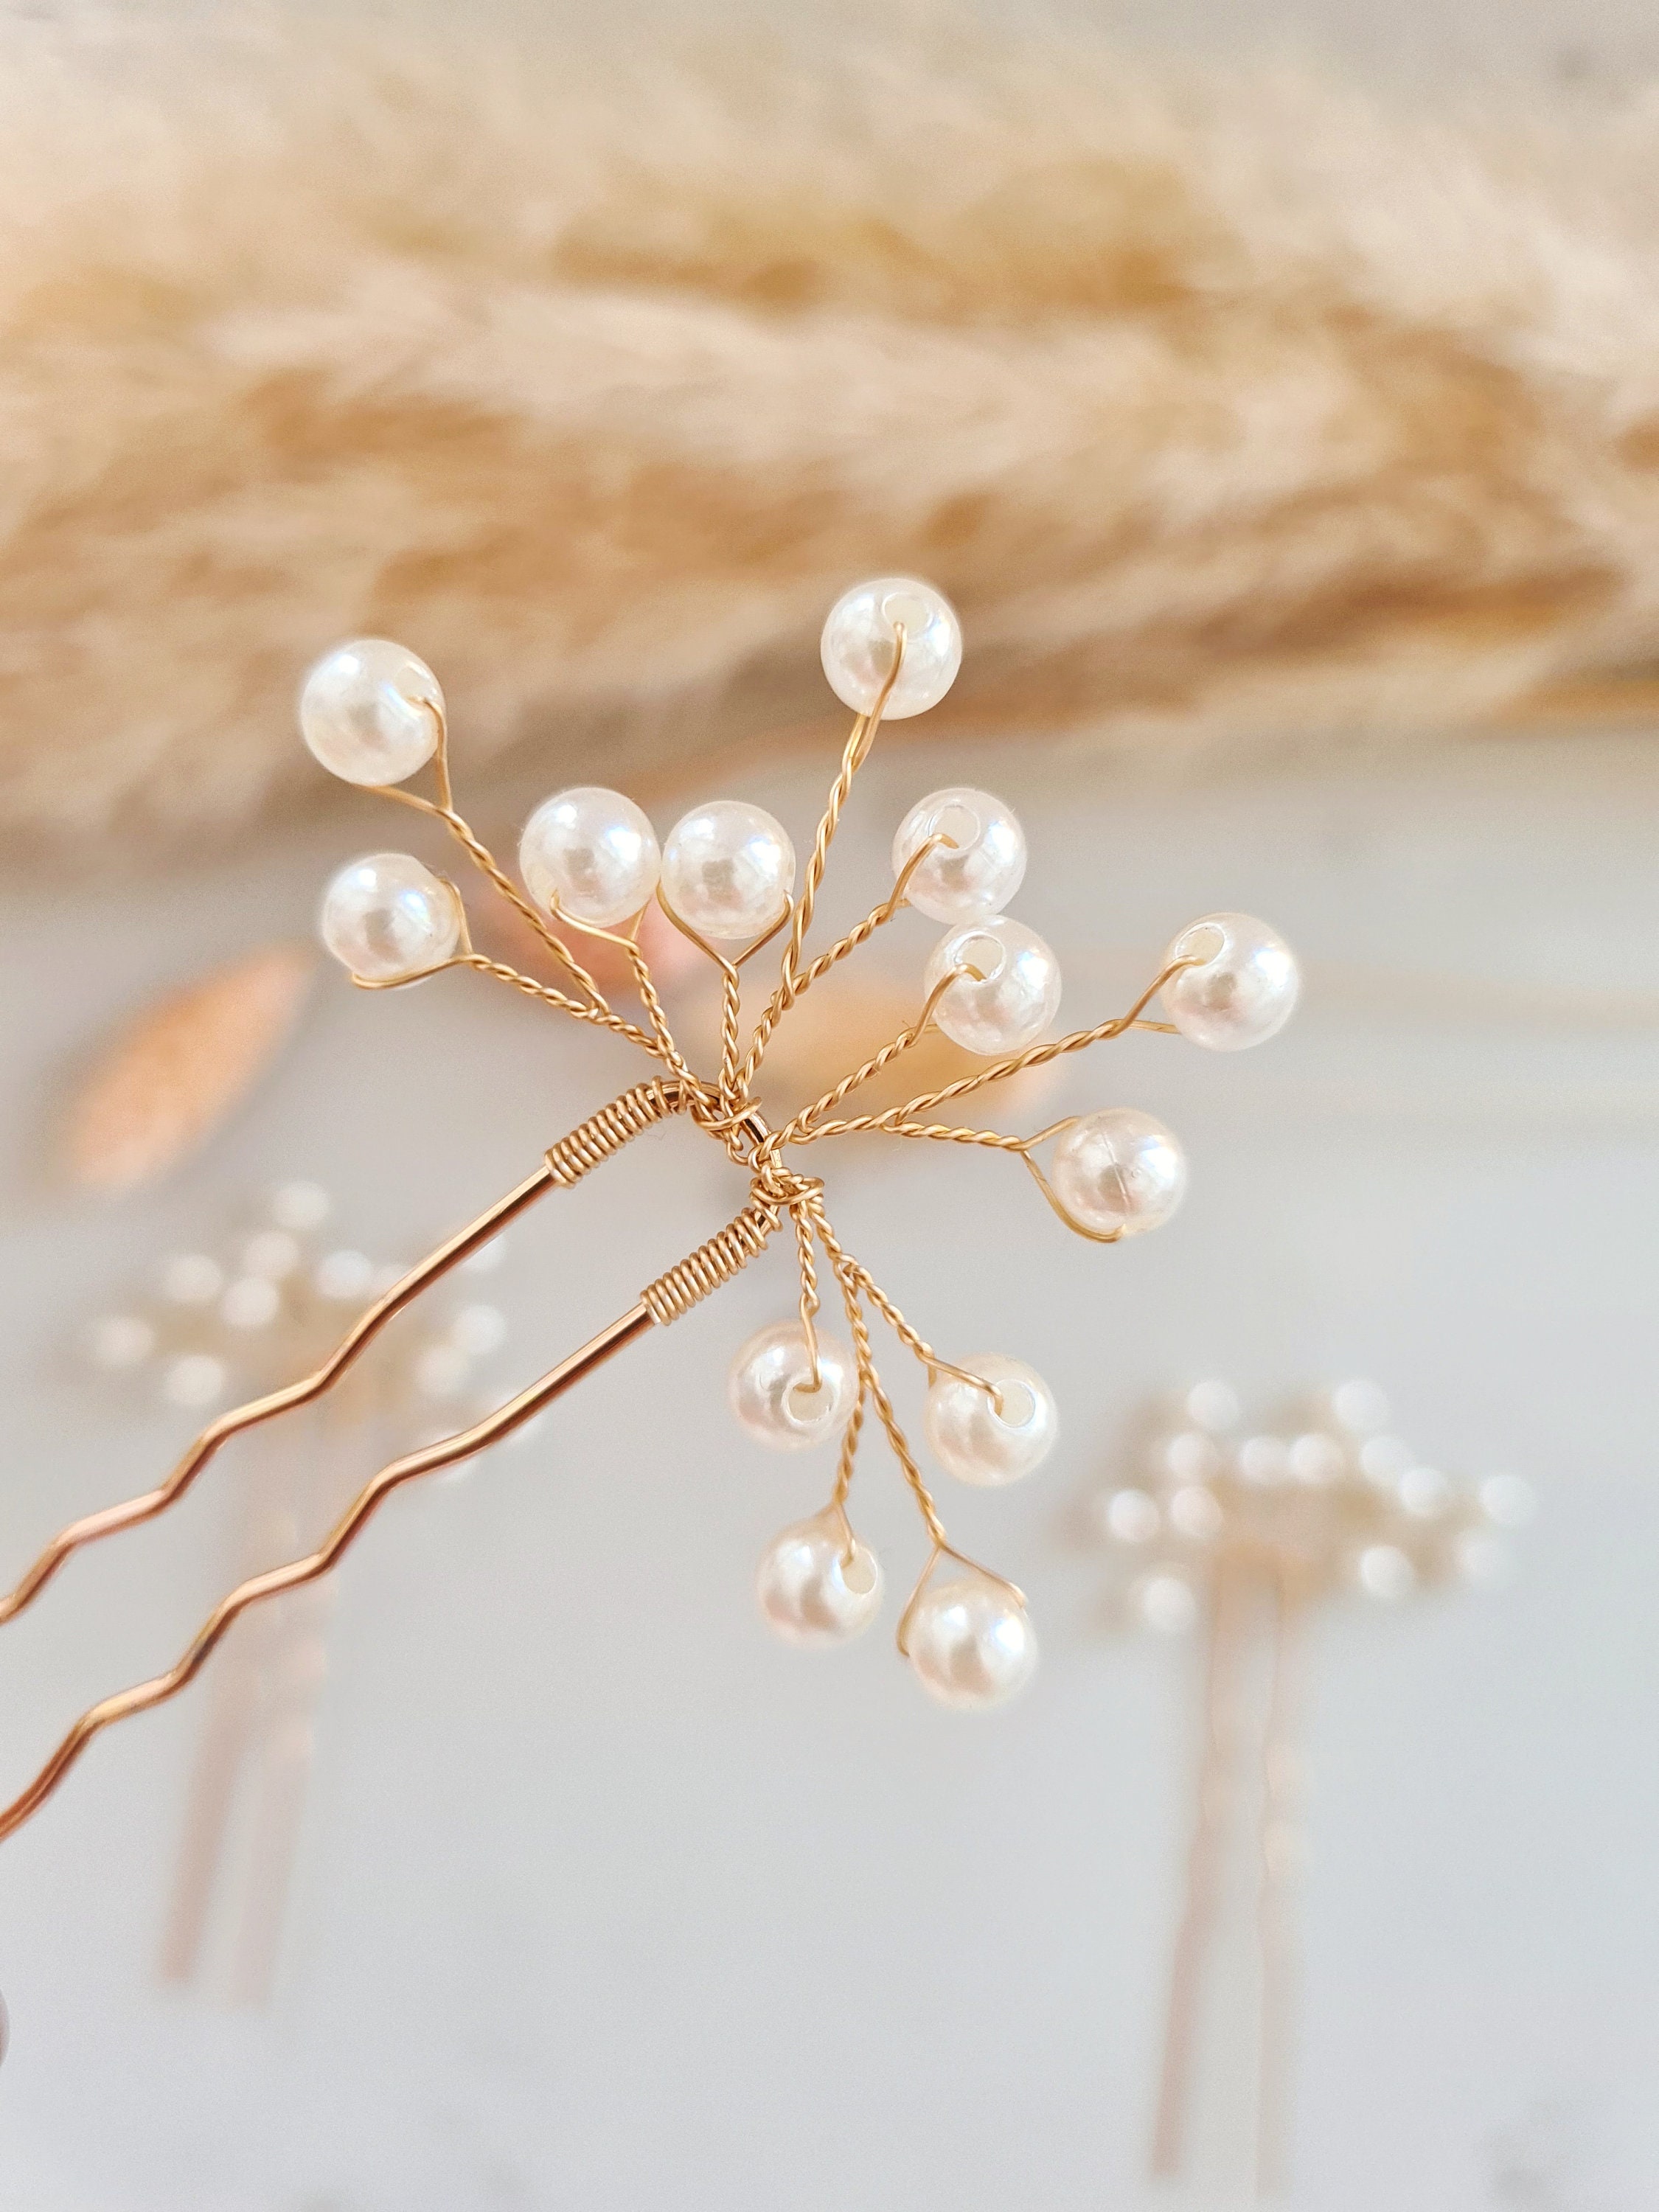 Adora by Simona Wedding Hair Accessories - Pearl and Crystal Bridal Hair Pin - Available in Silver and Gold Silver